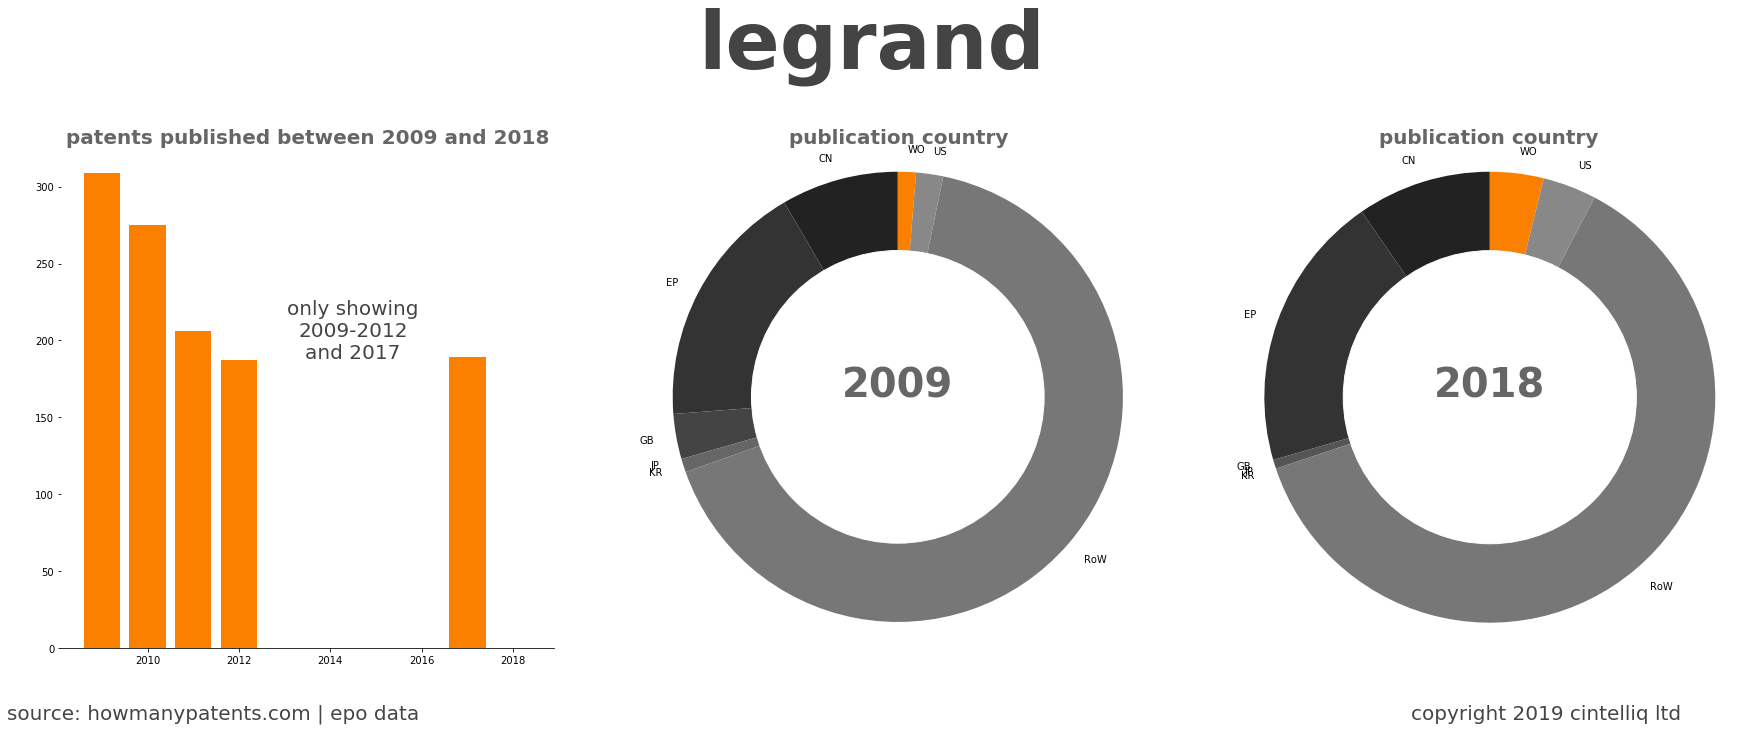 summary of patents for Legrand